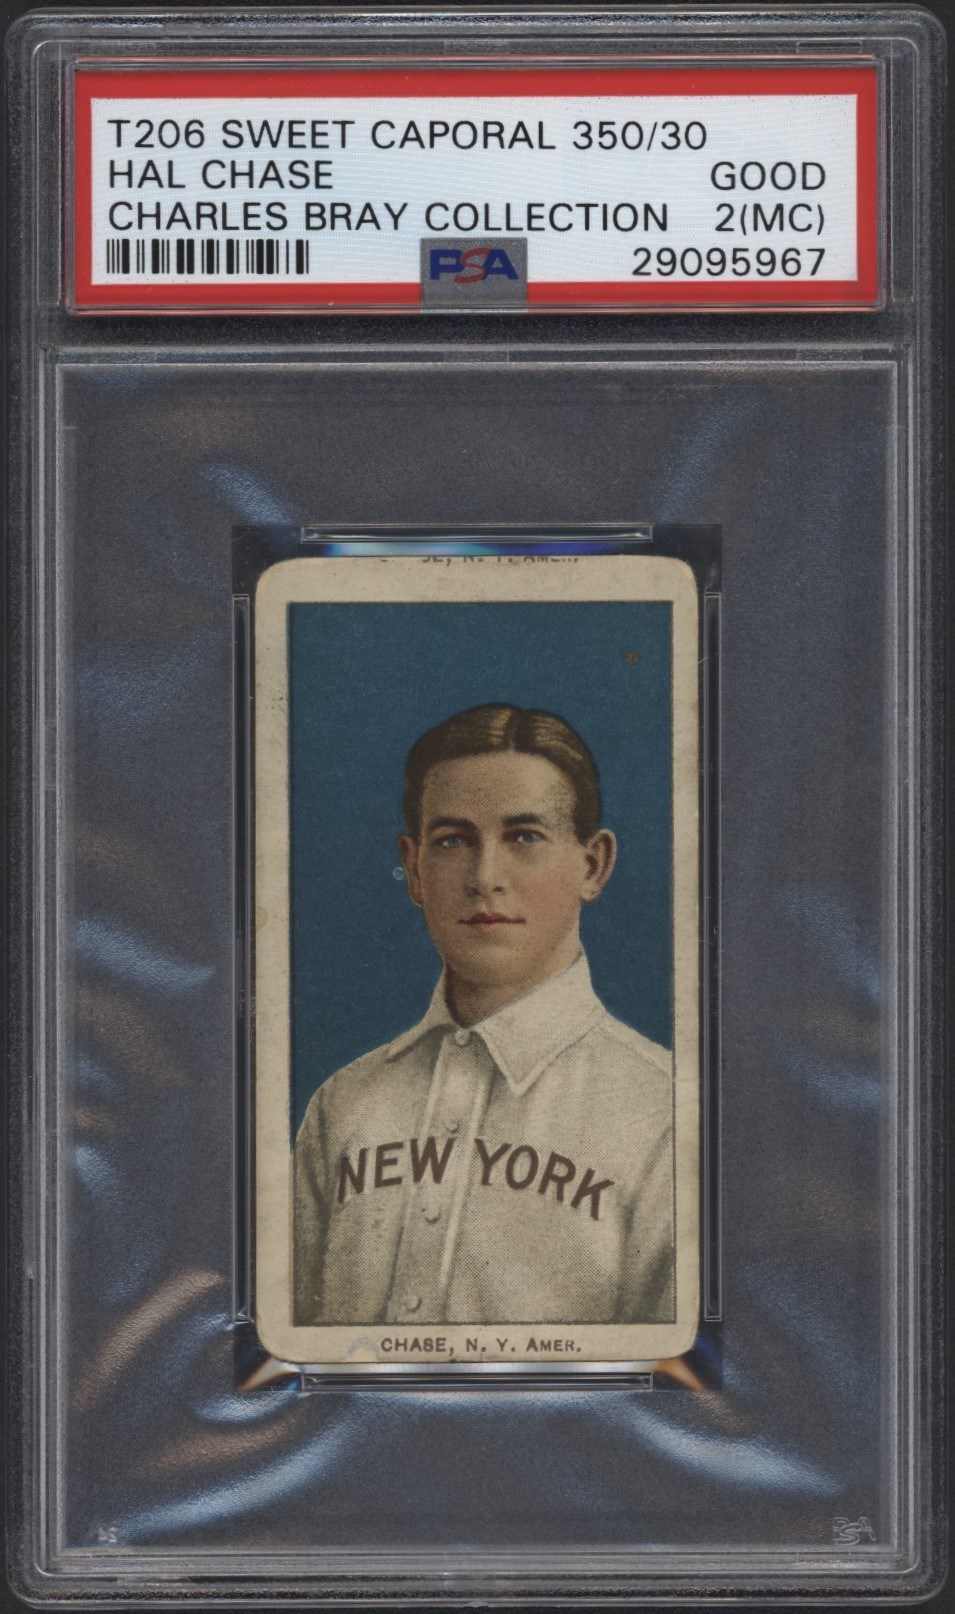 Baseball and Trading Cards - T206 Sweet Caporal 350/30 Hal Chase Blue Portrait PSA 2 From the Charles Bray Collection